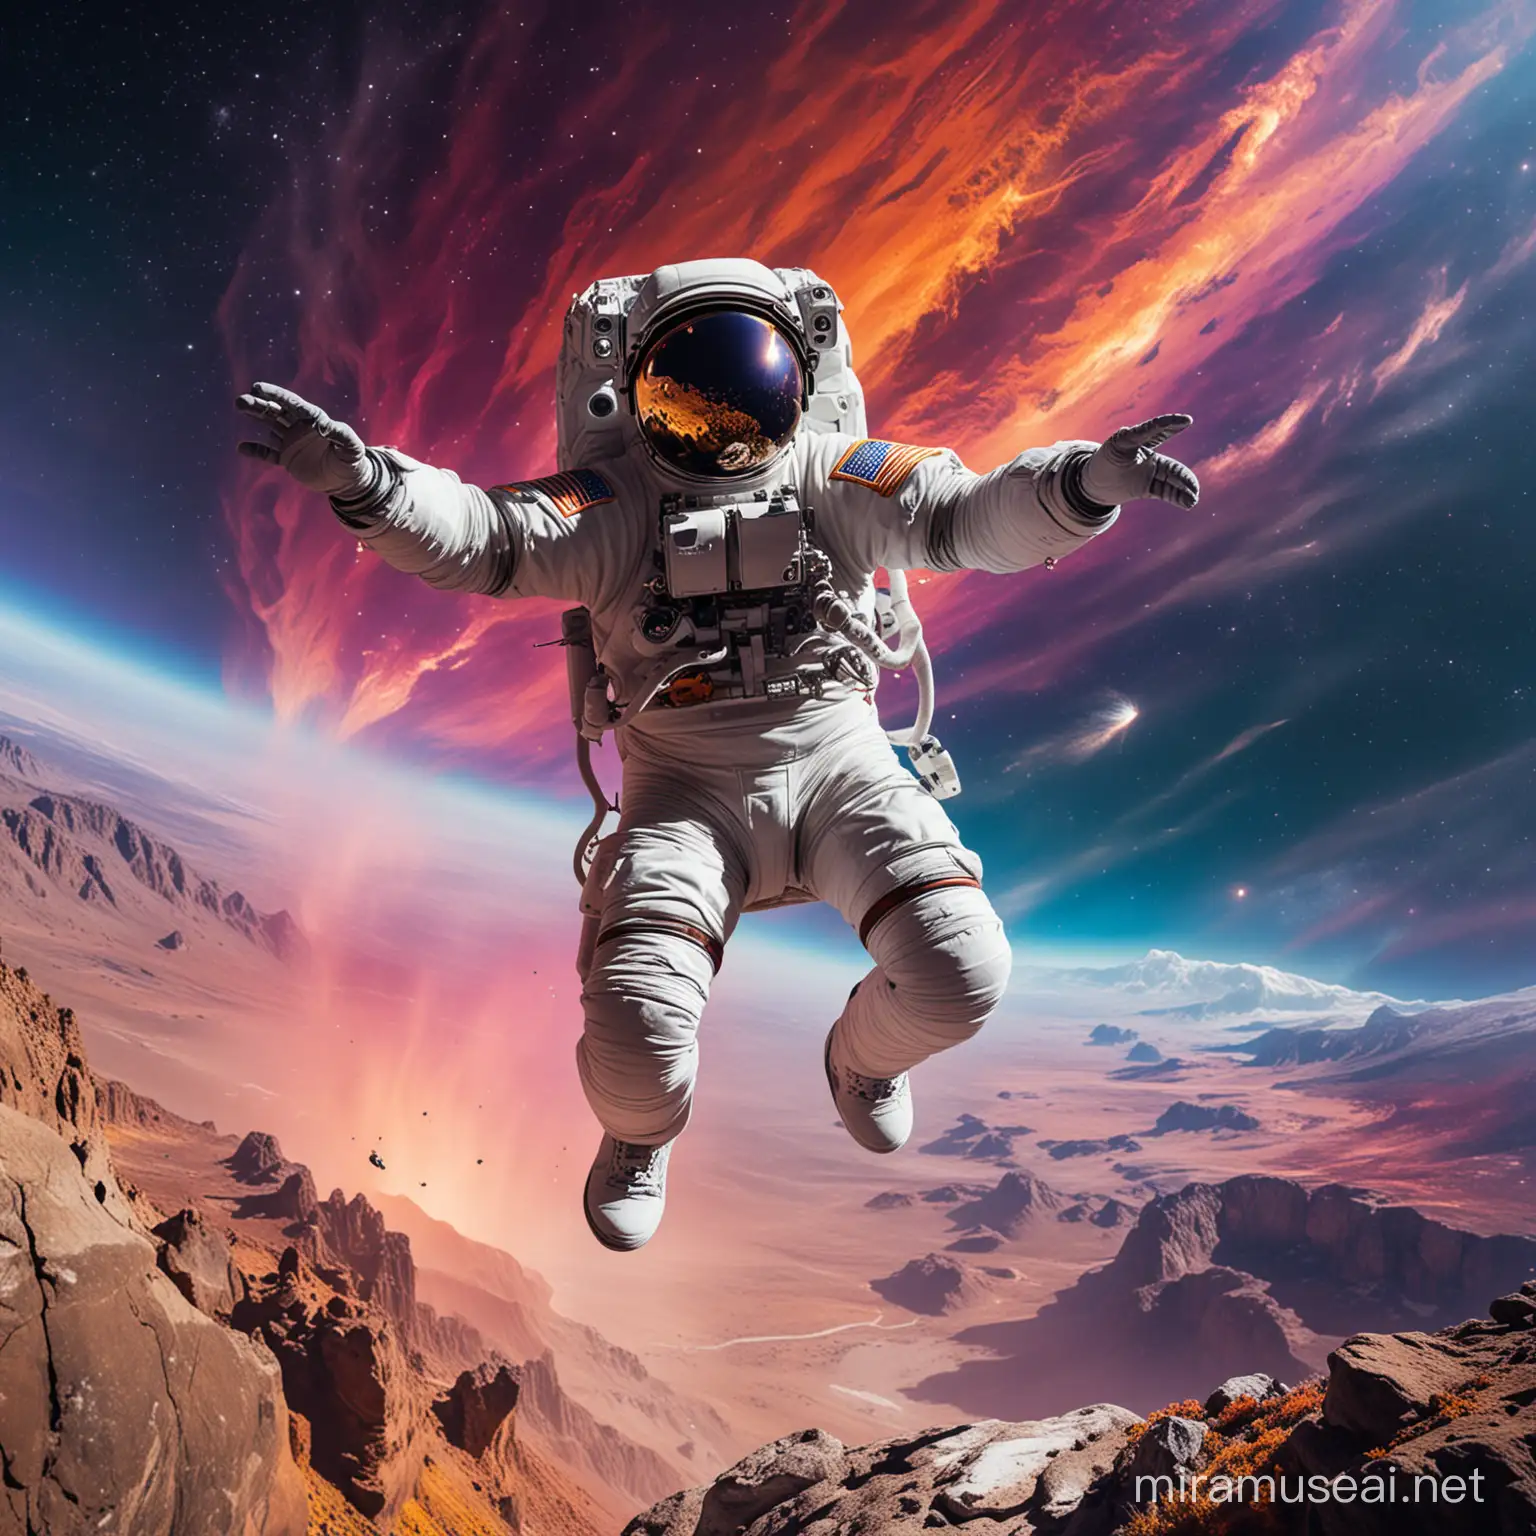 Astronaut Space Jumping Amid Colorful Cosmos Over Rocky Mountain Range